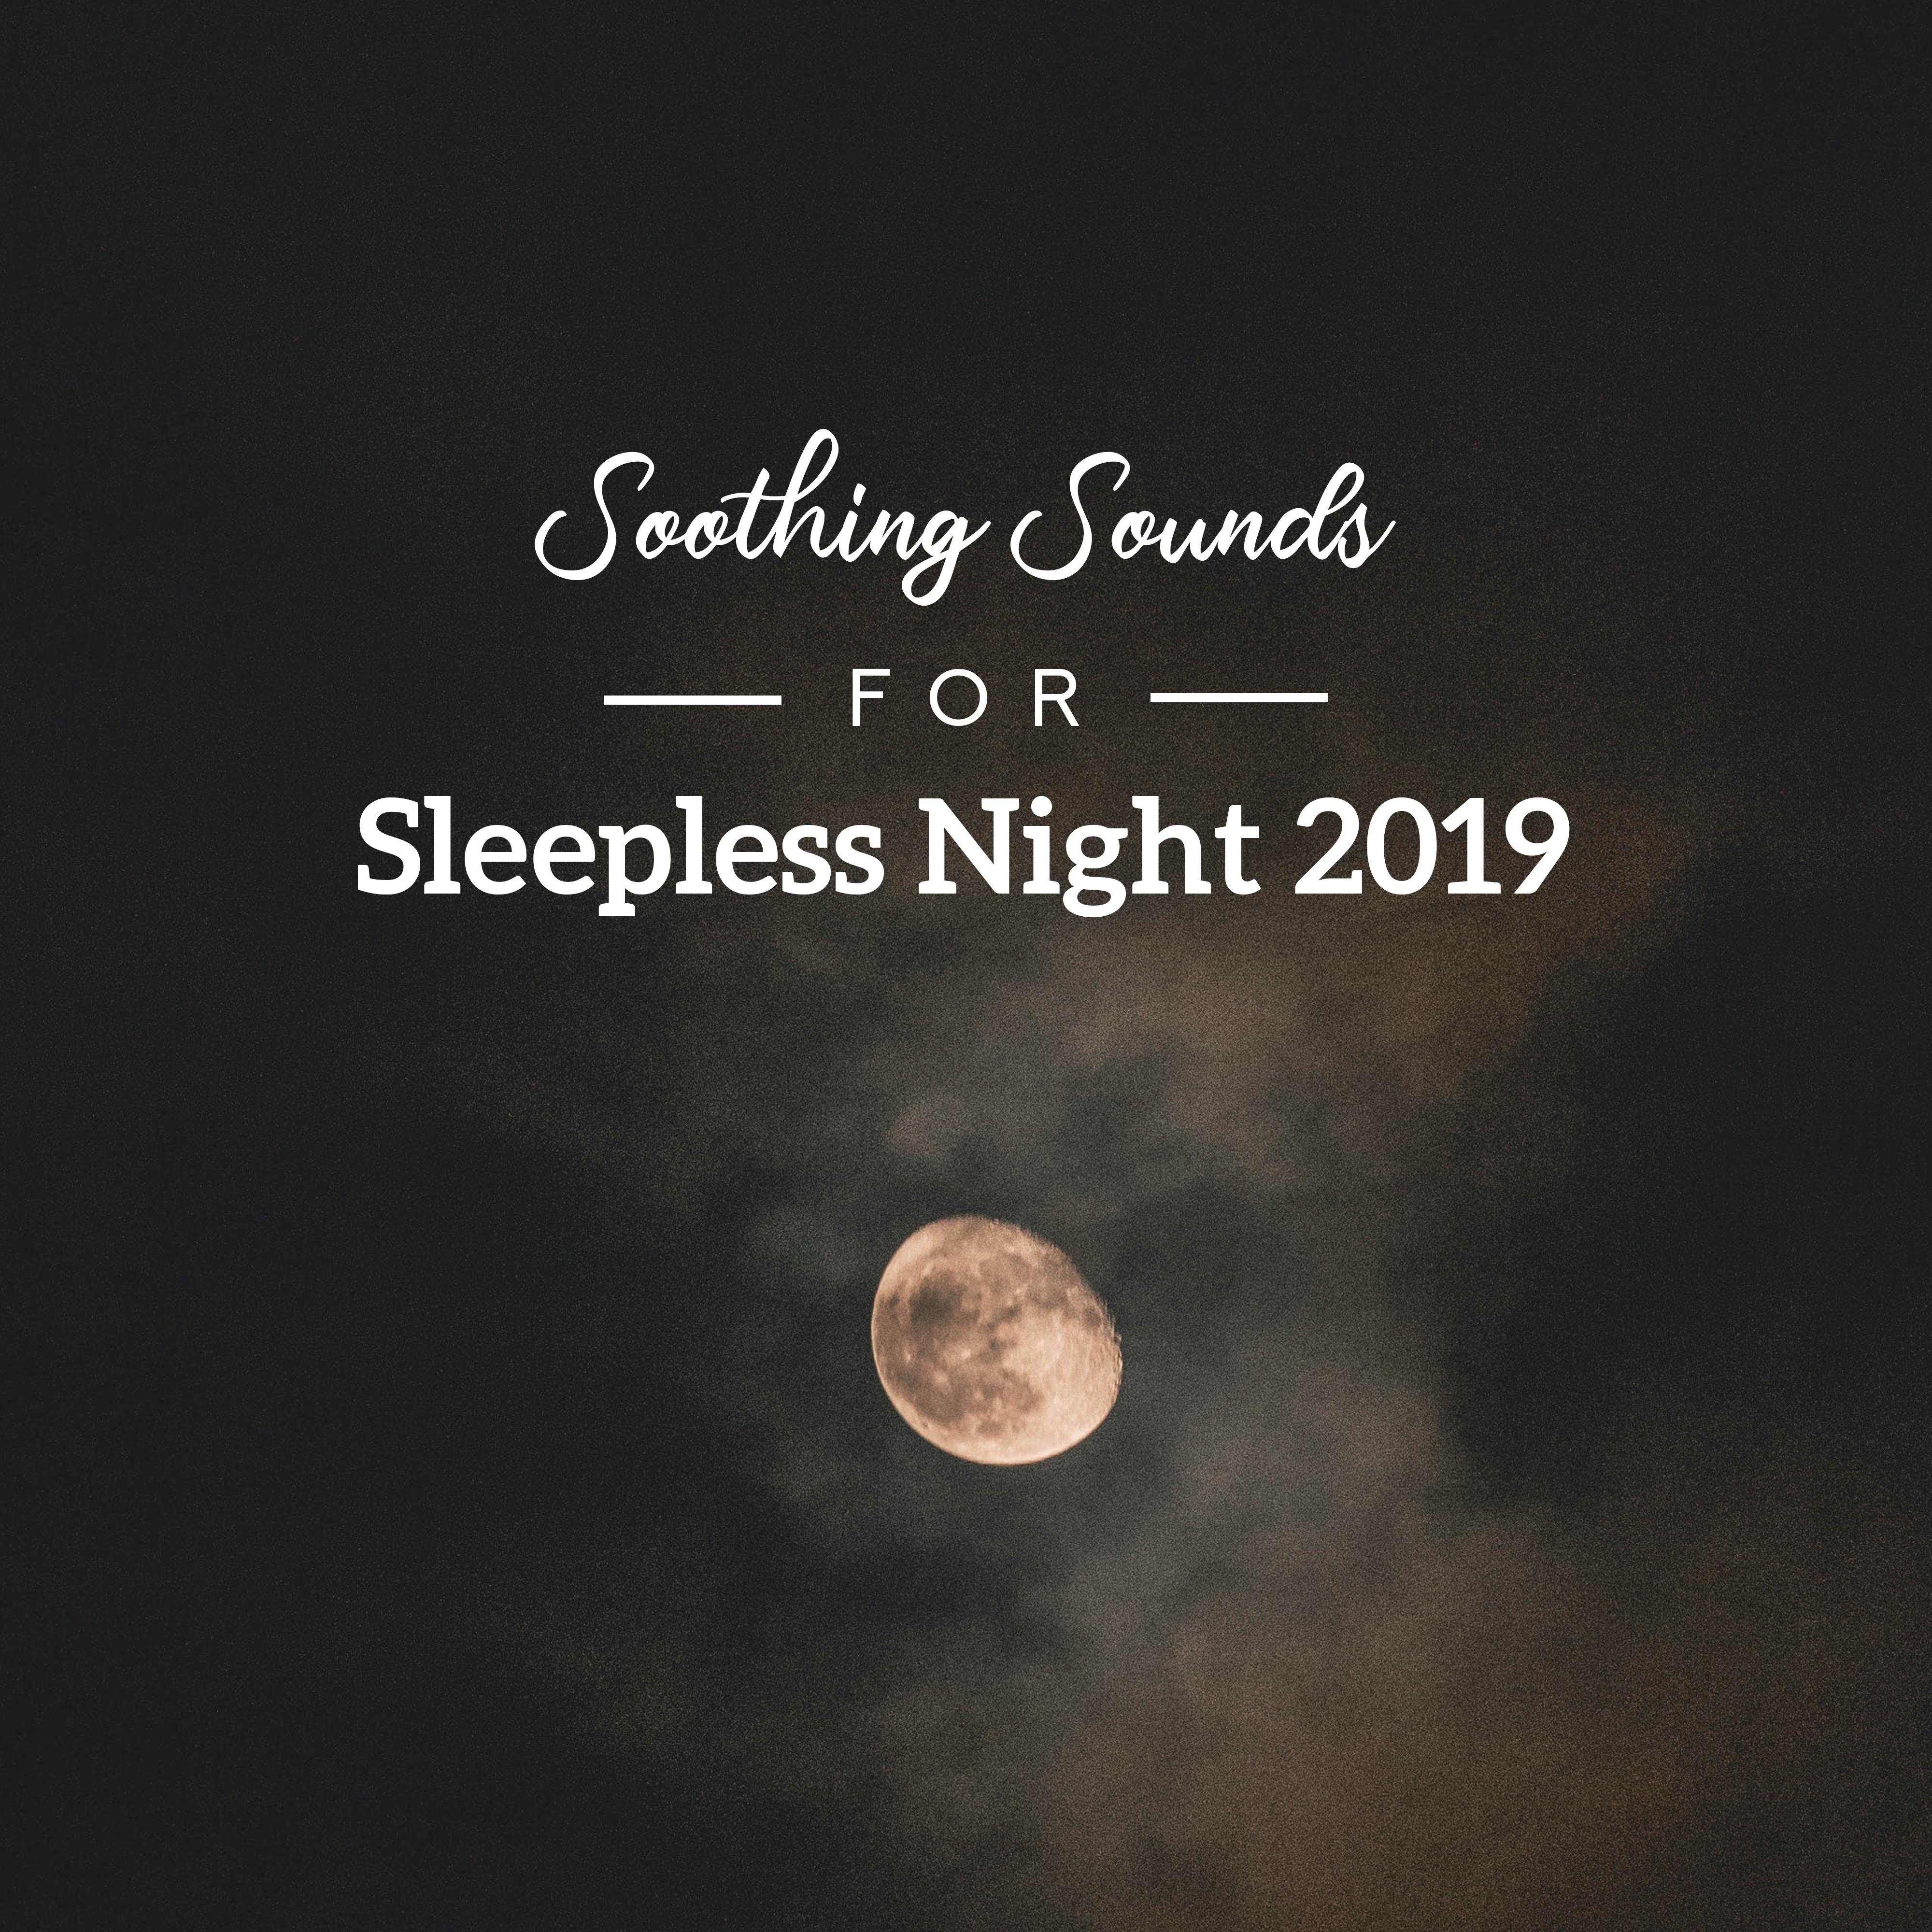 Soothing Sounds for Sleepless Night 2019